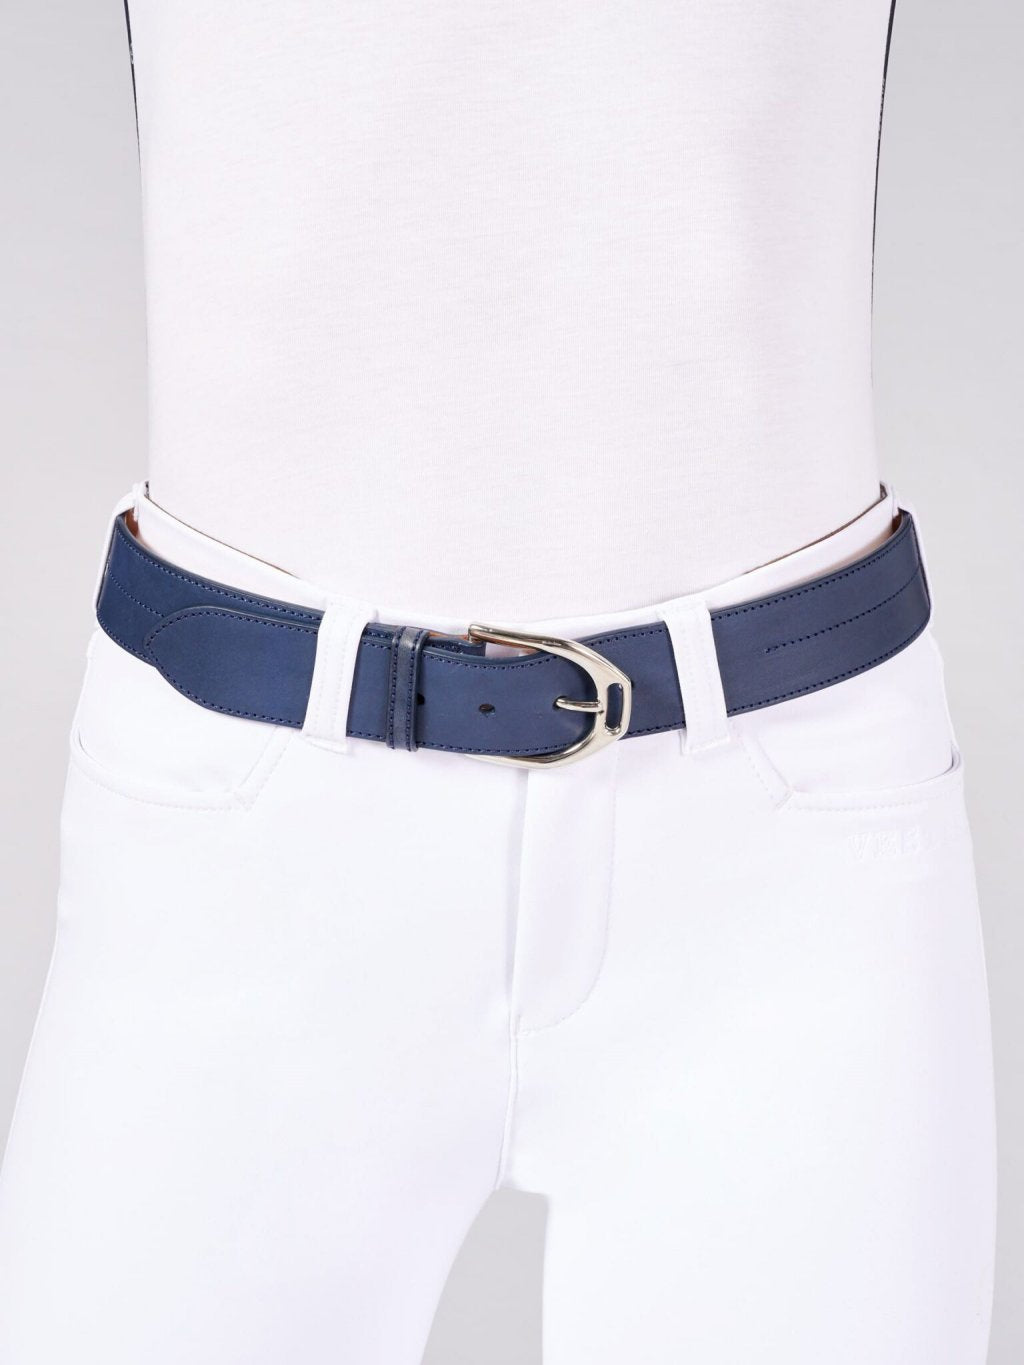 Buenos Aires Belt by VESTRUM: Elevate Your Style